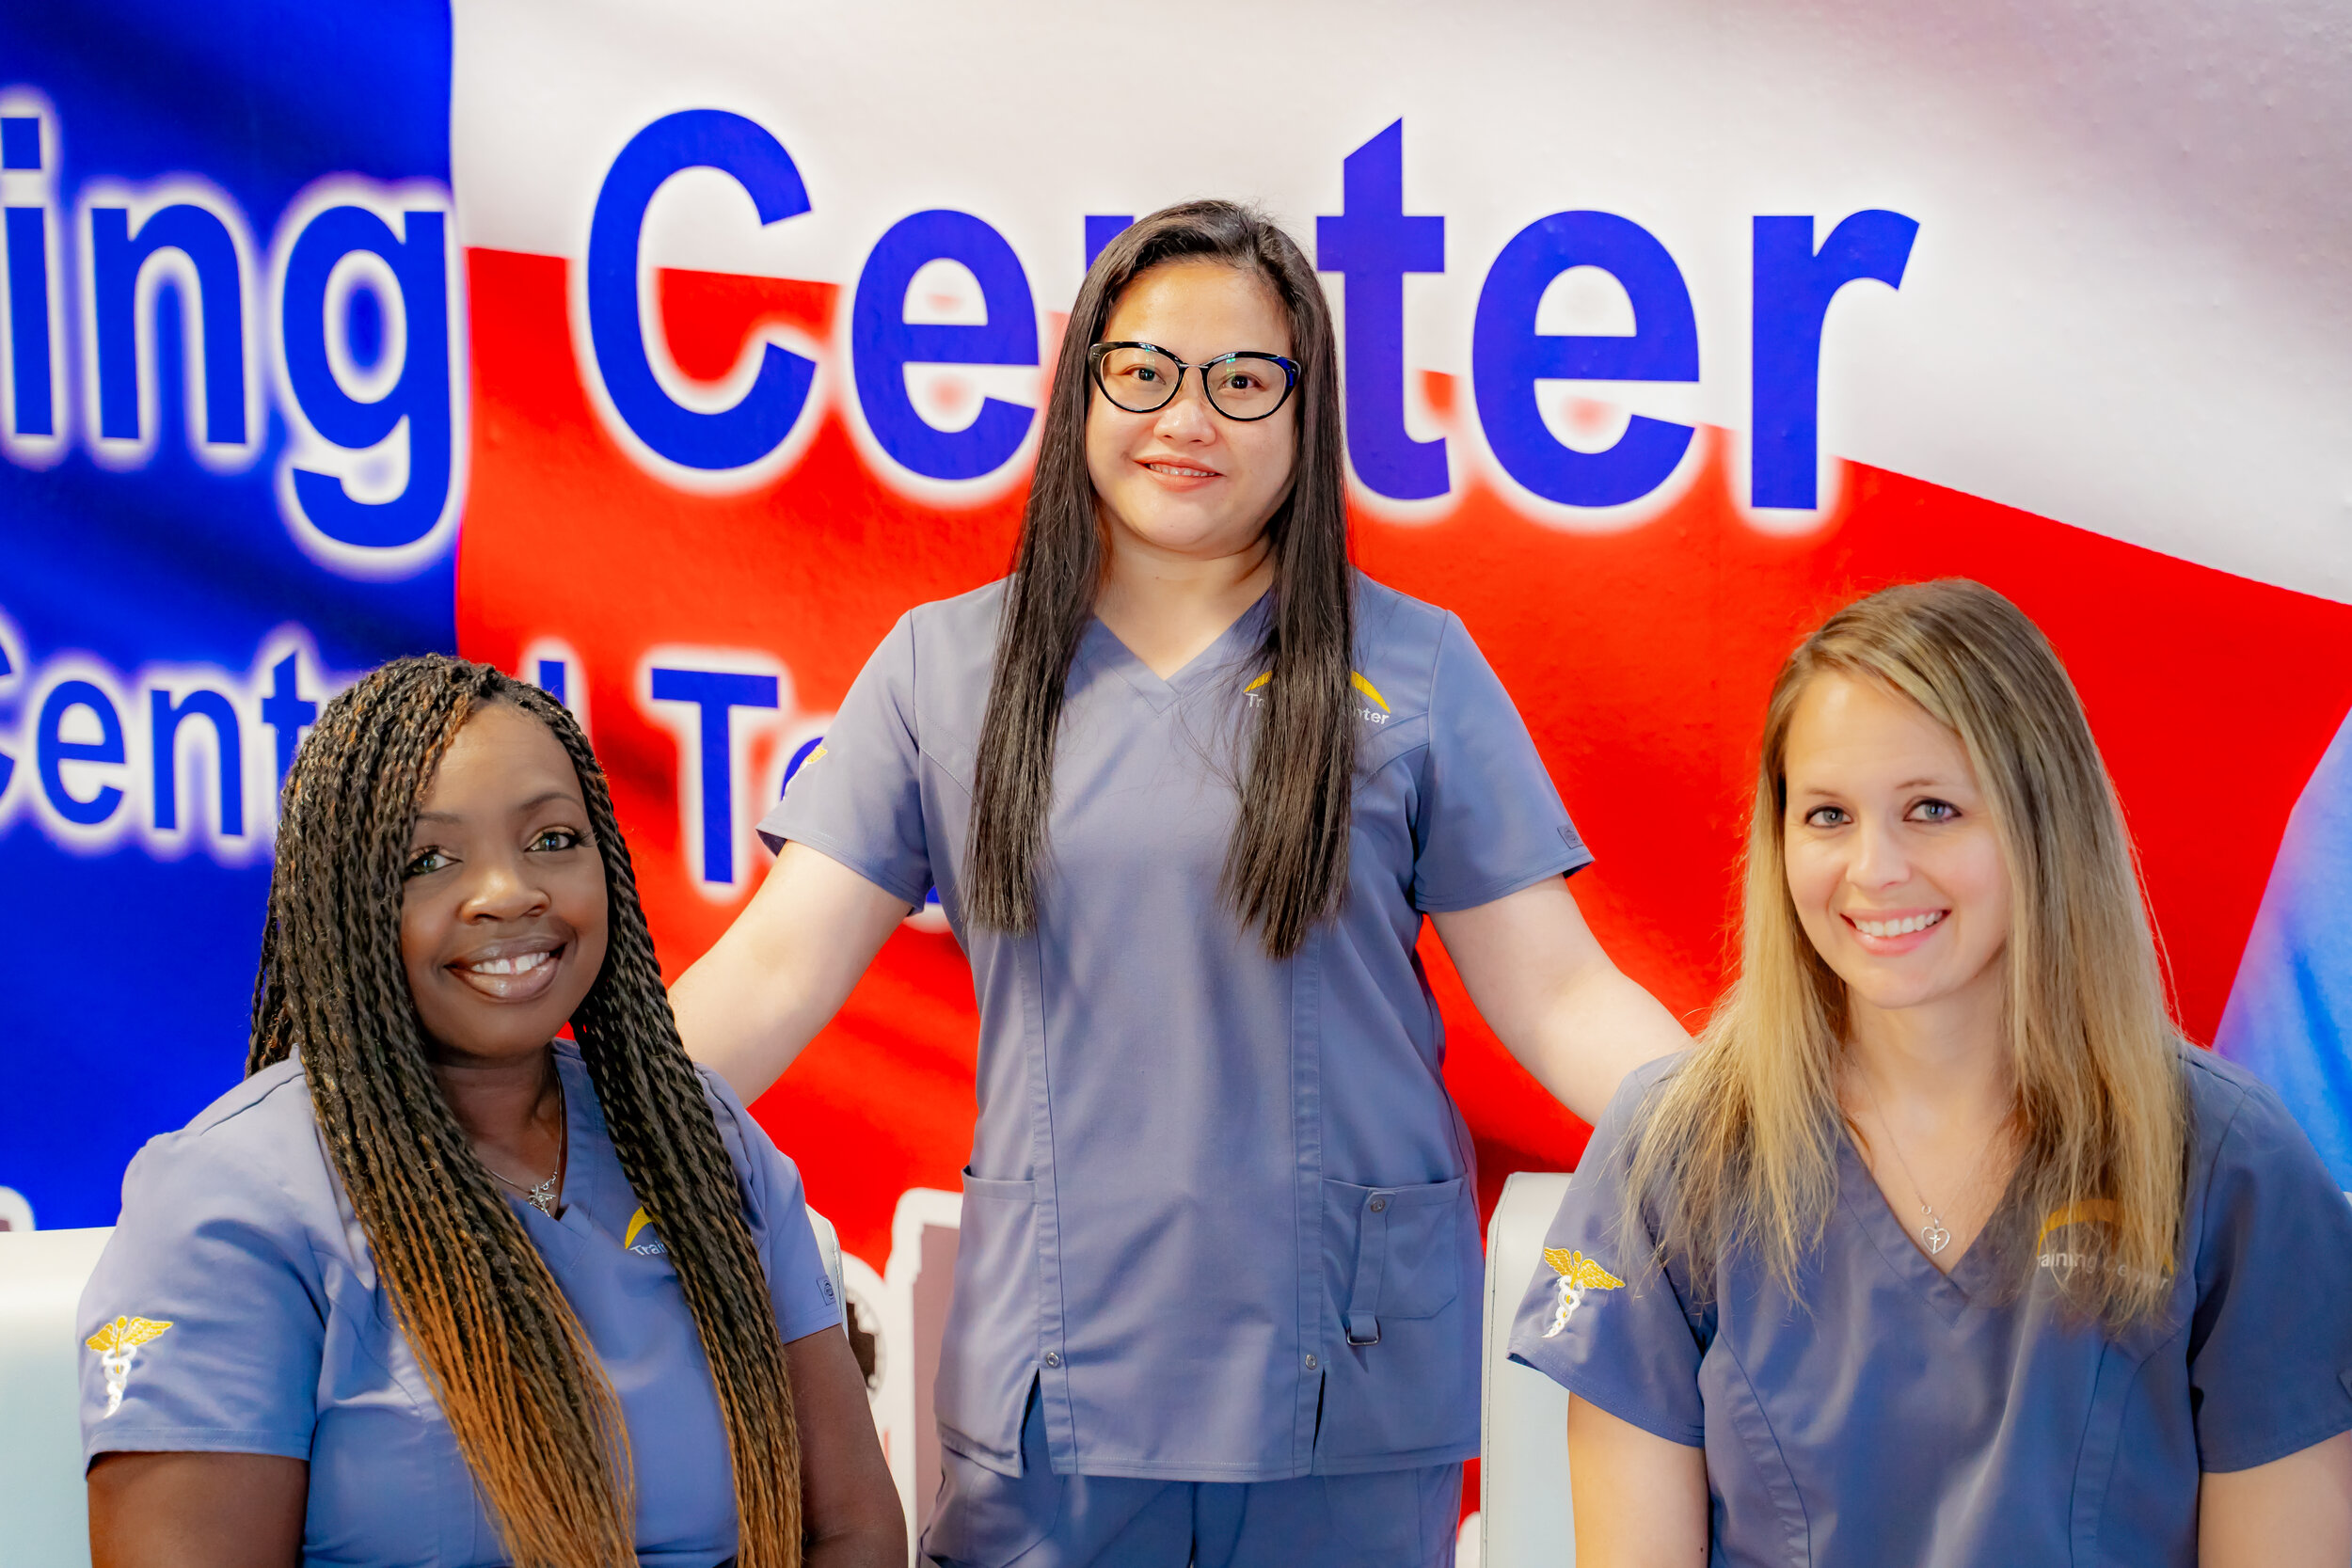 Training Center of Central Texas Students Smiling